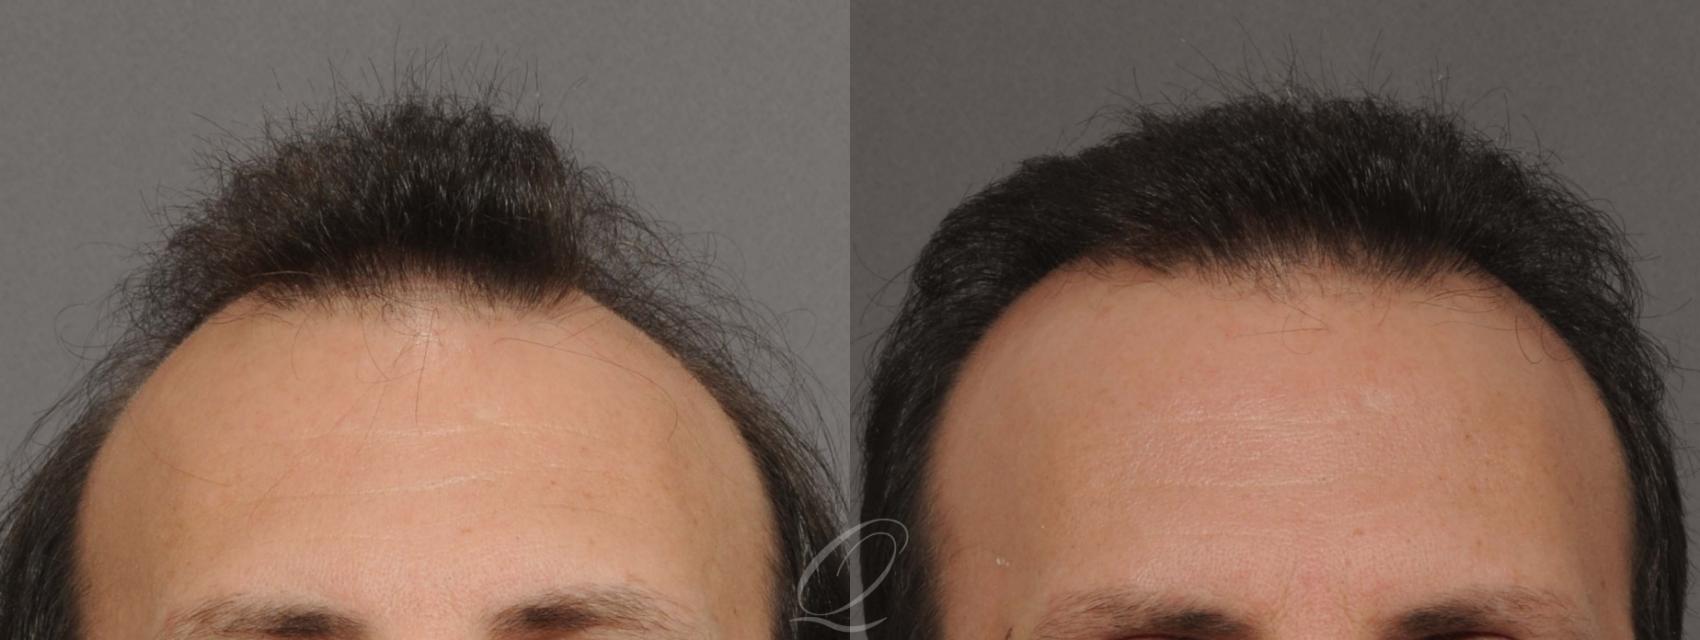 FUT Before & After Photos Patient 1031 | Rochester, Buffalo, & Syracuse, NY  | Quatela Center for Hair Restoration